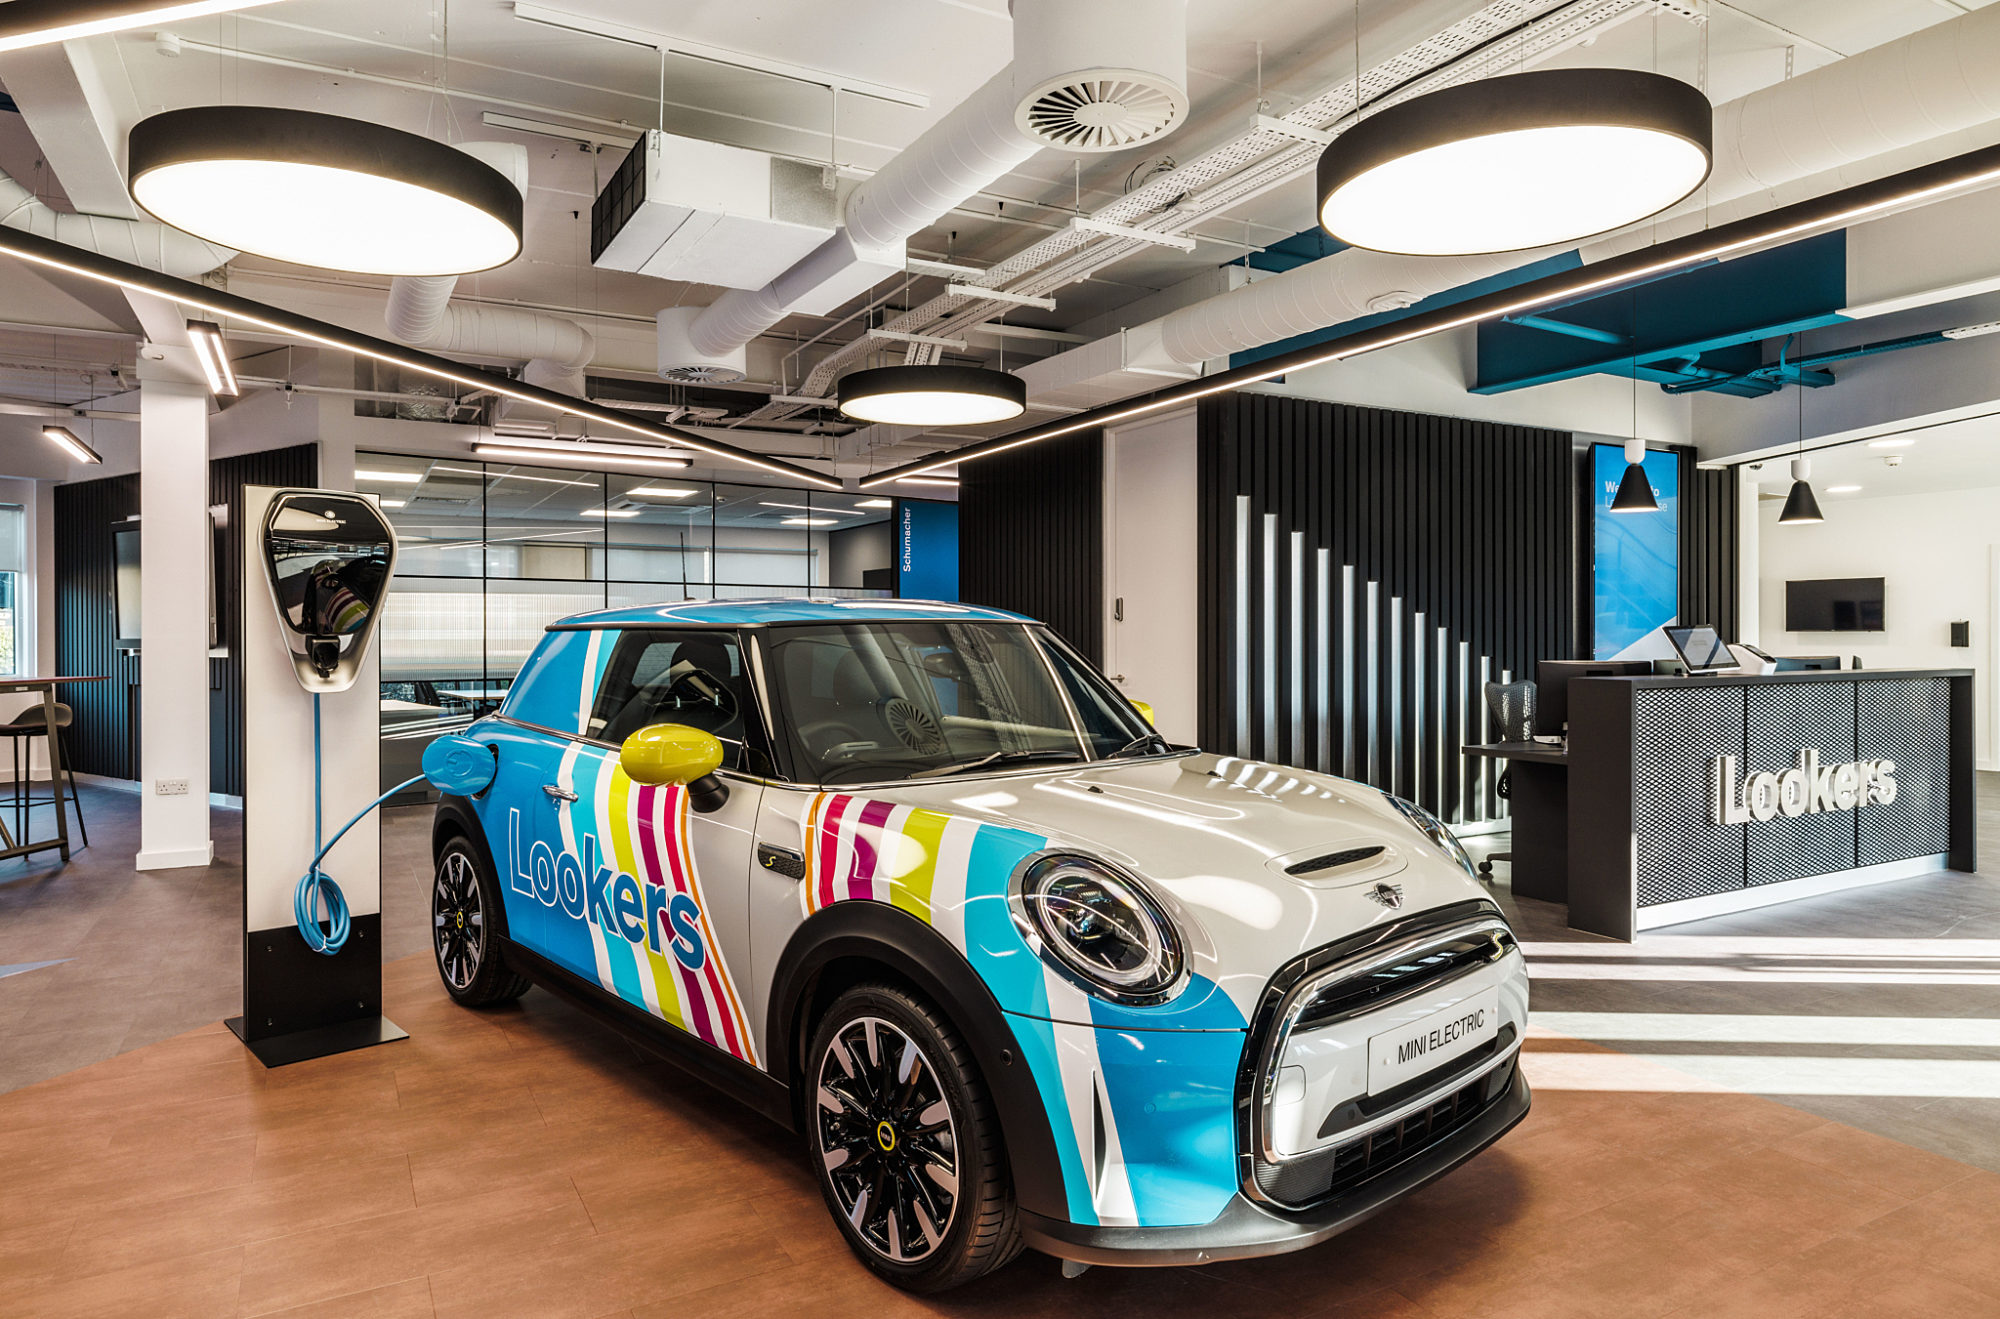 Mini electric car is feature in office fit out